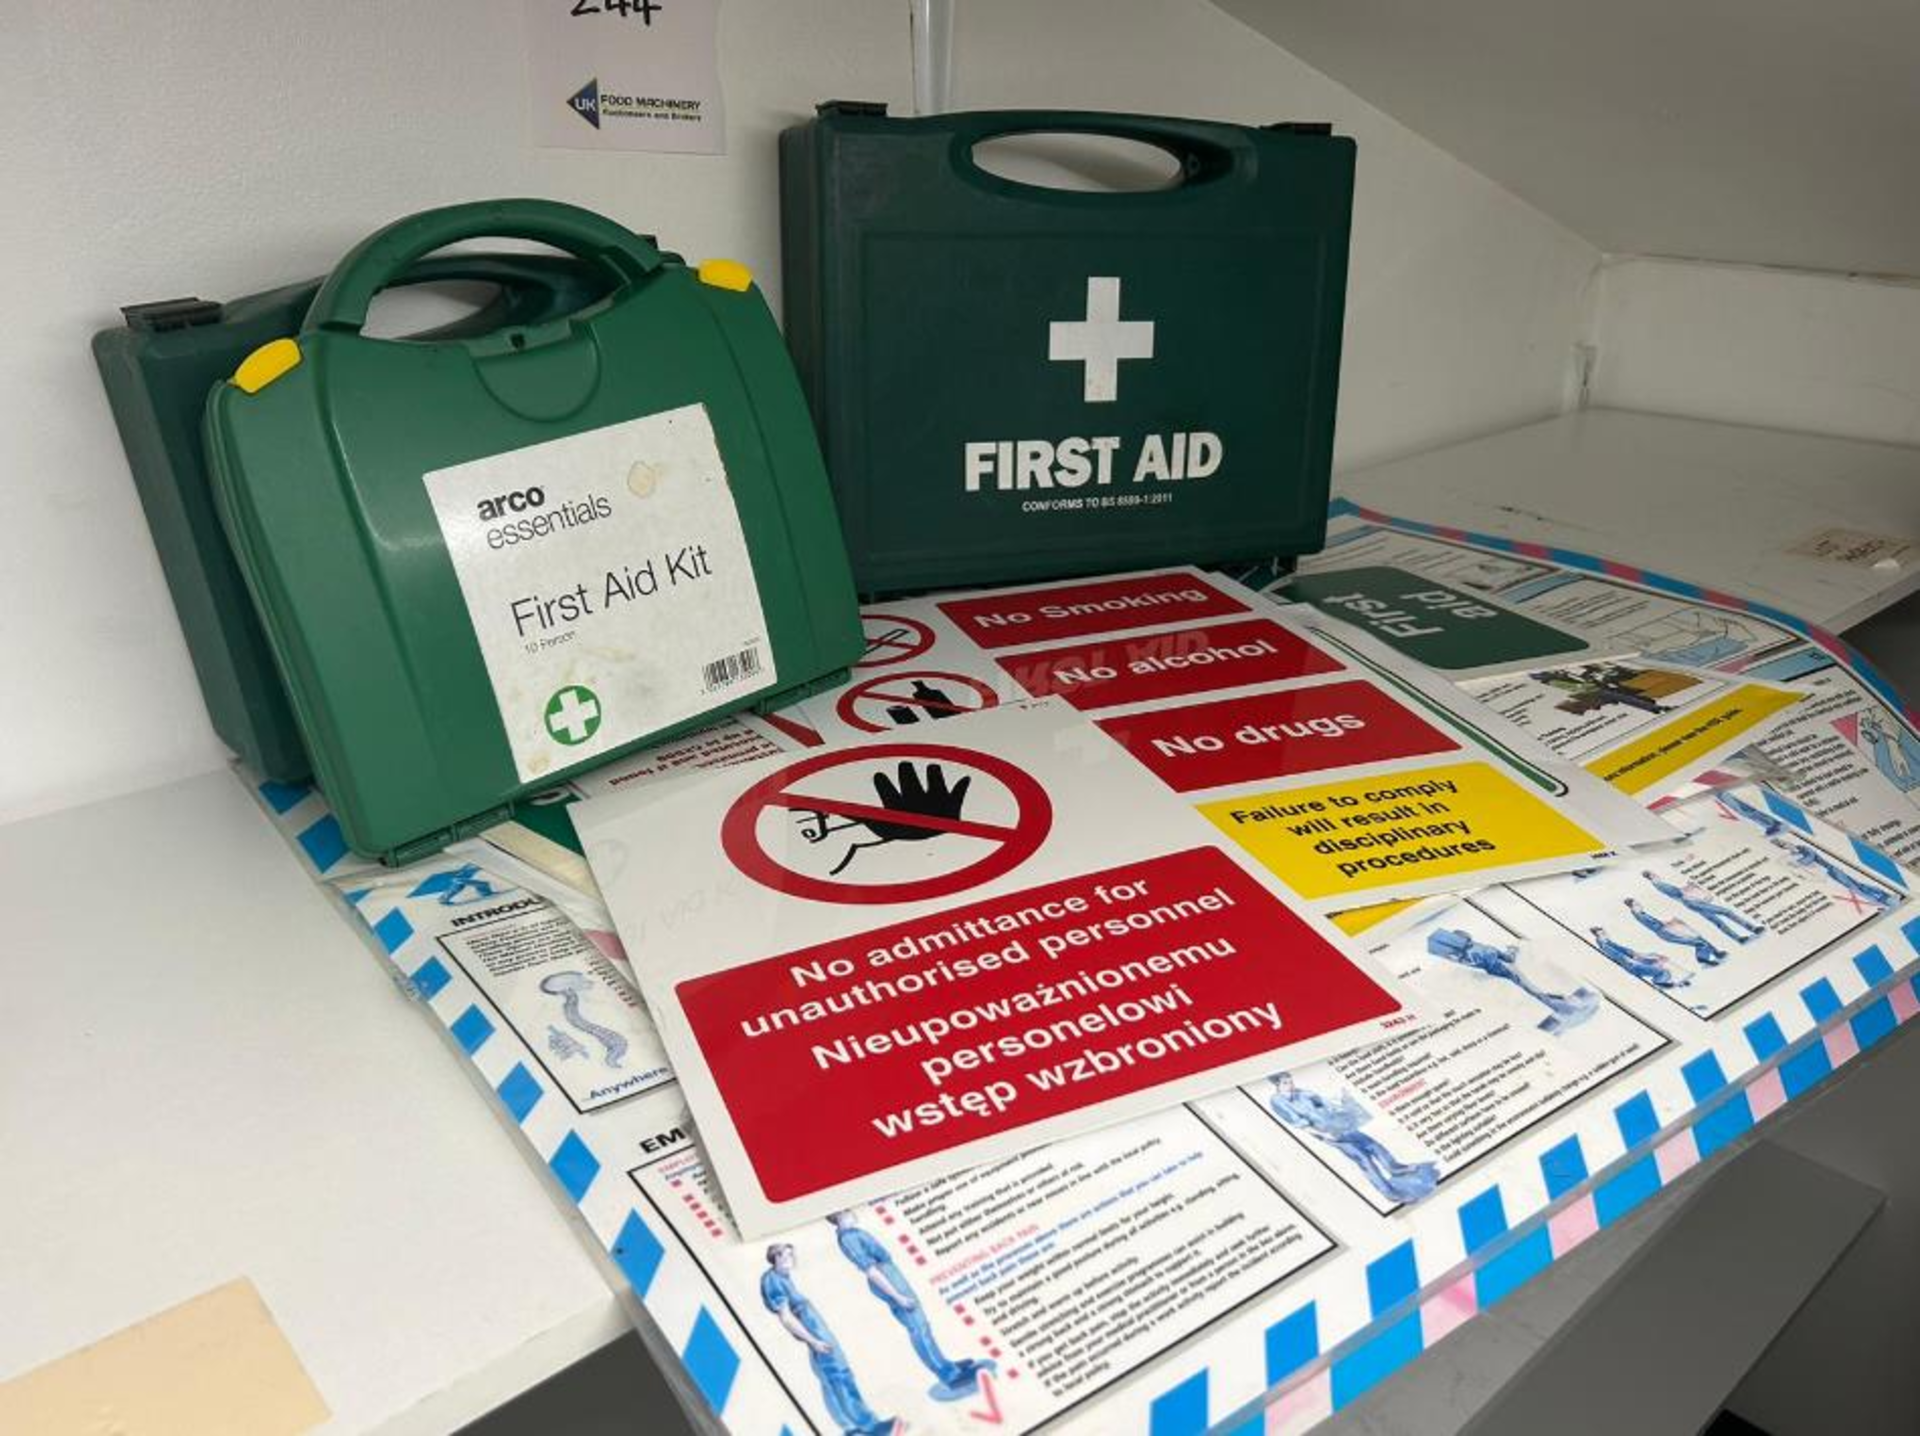 FIRST AID BOXES AND SIGNAGE